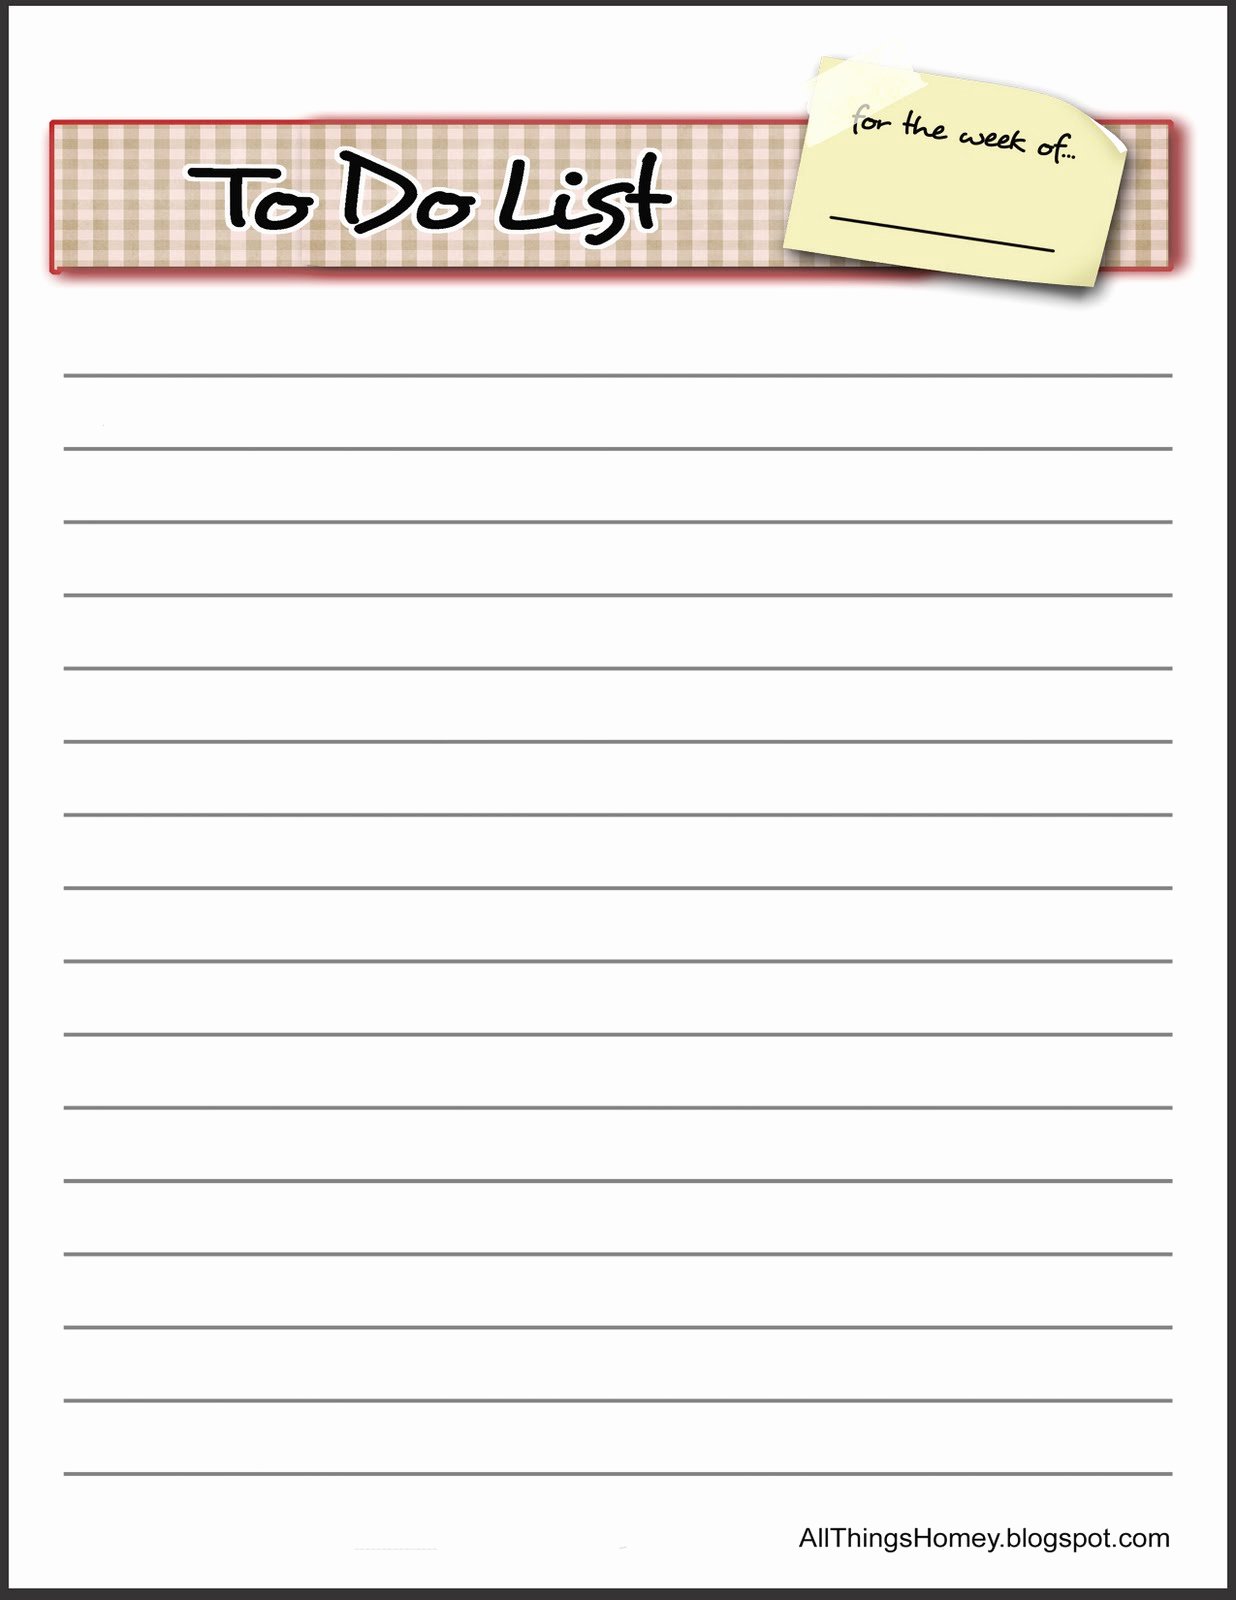 Things to Do List Template New 6 Best Of Things to Do List Printable Template